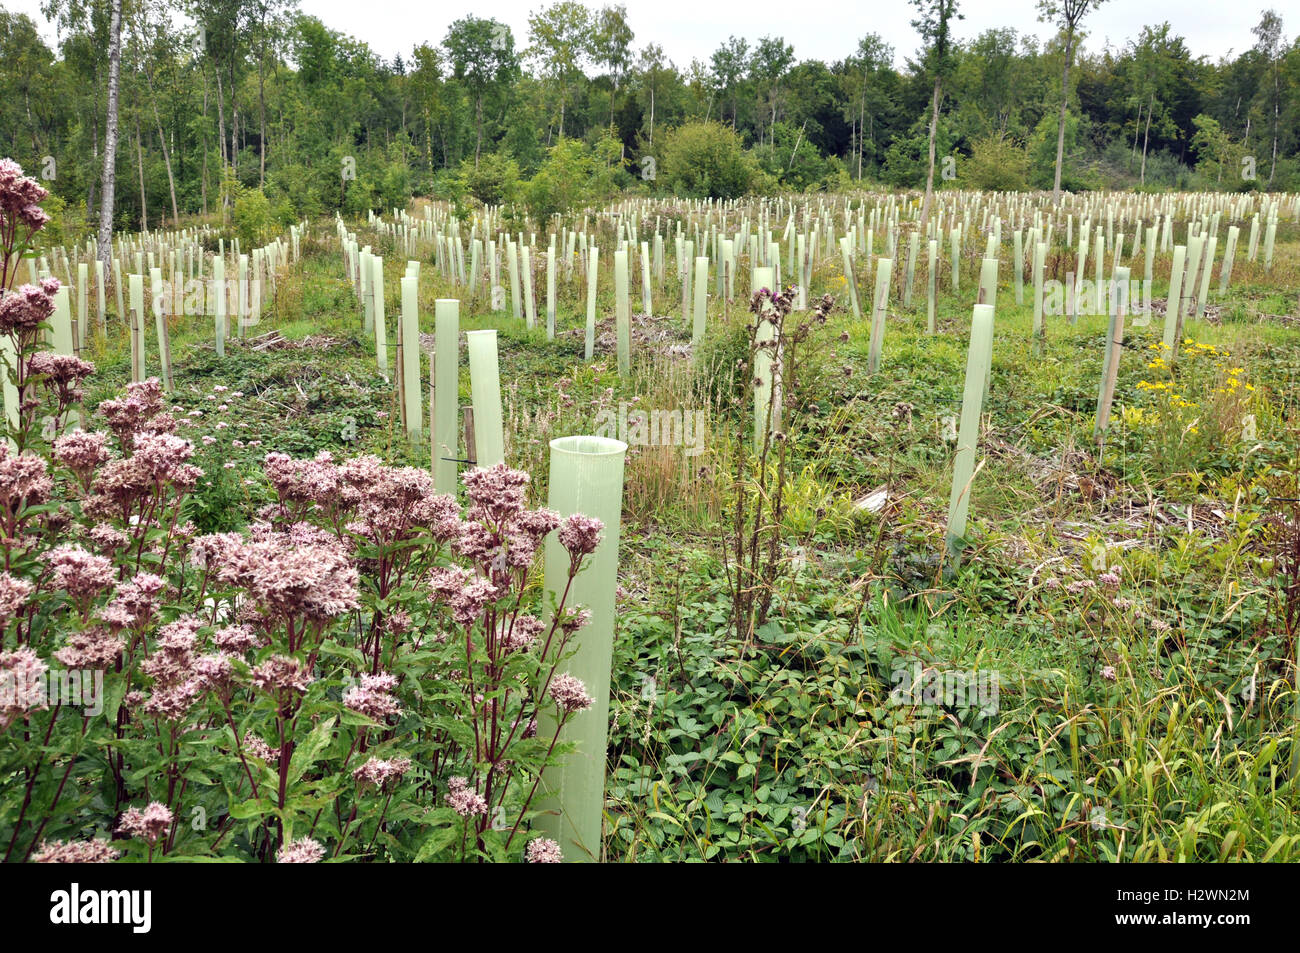 Hemp-agrimony flowers in front of plastic tubes protecting newly planted trees from animal damage Stock Photo